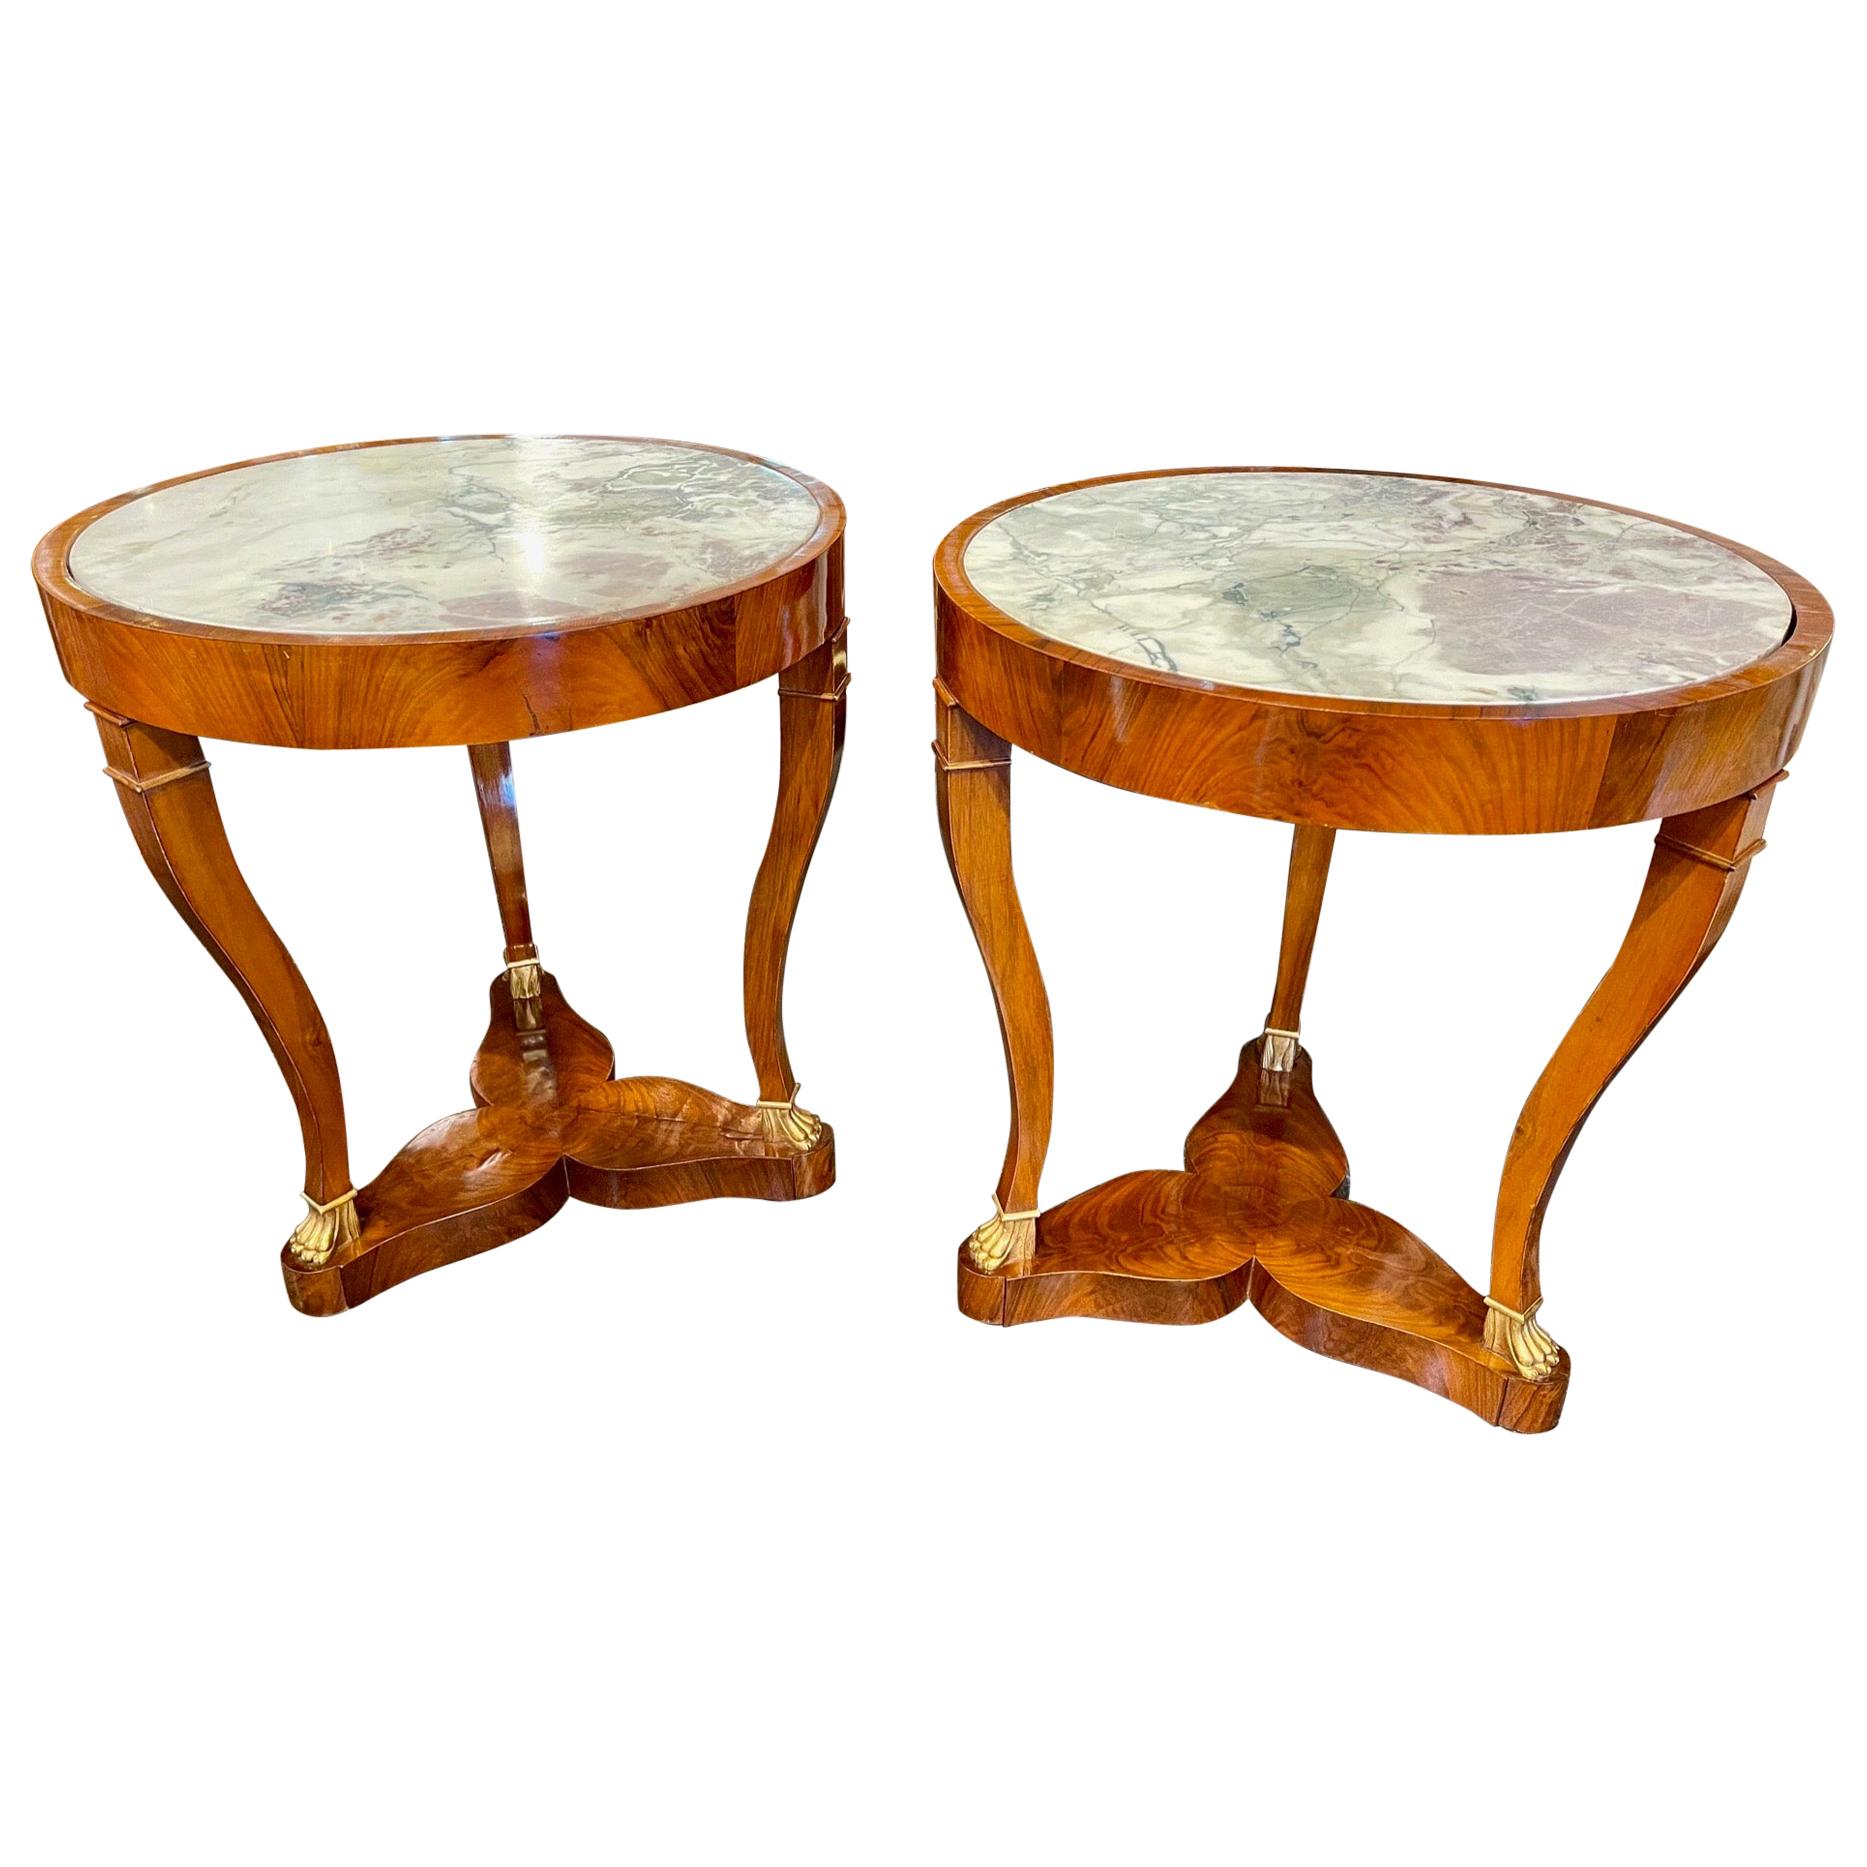 Pair of 19th Century French Empire Mahogany Tables with Inset Breccia Marble